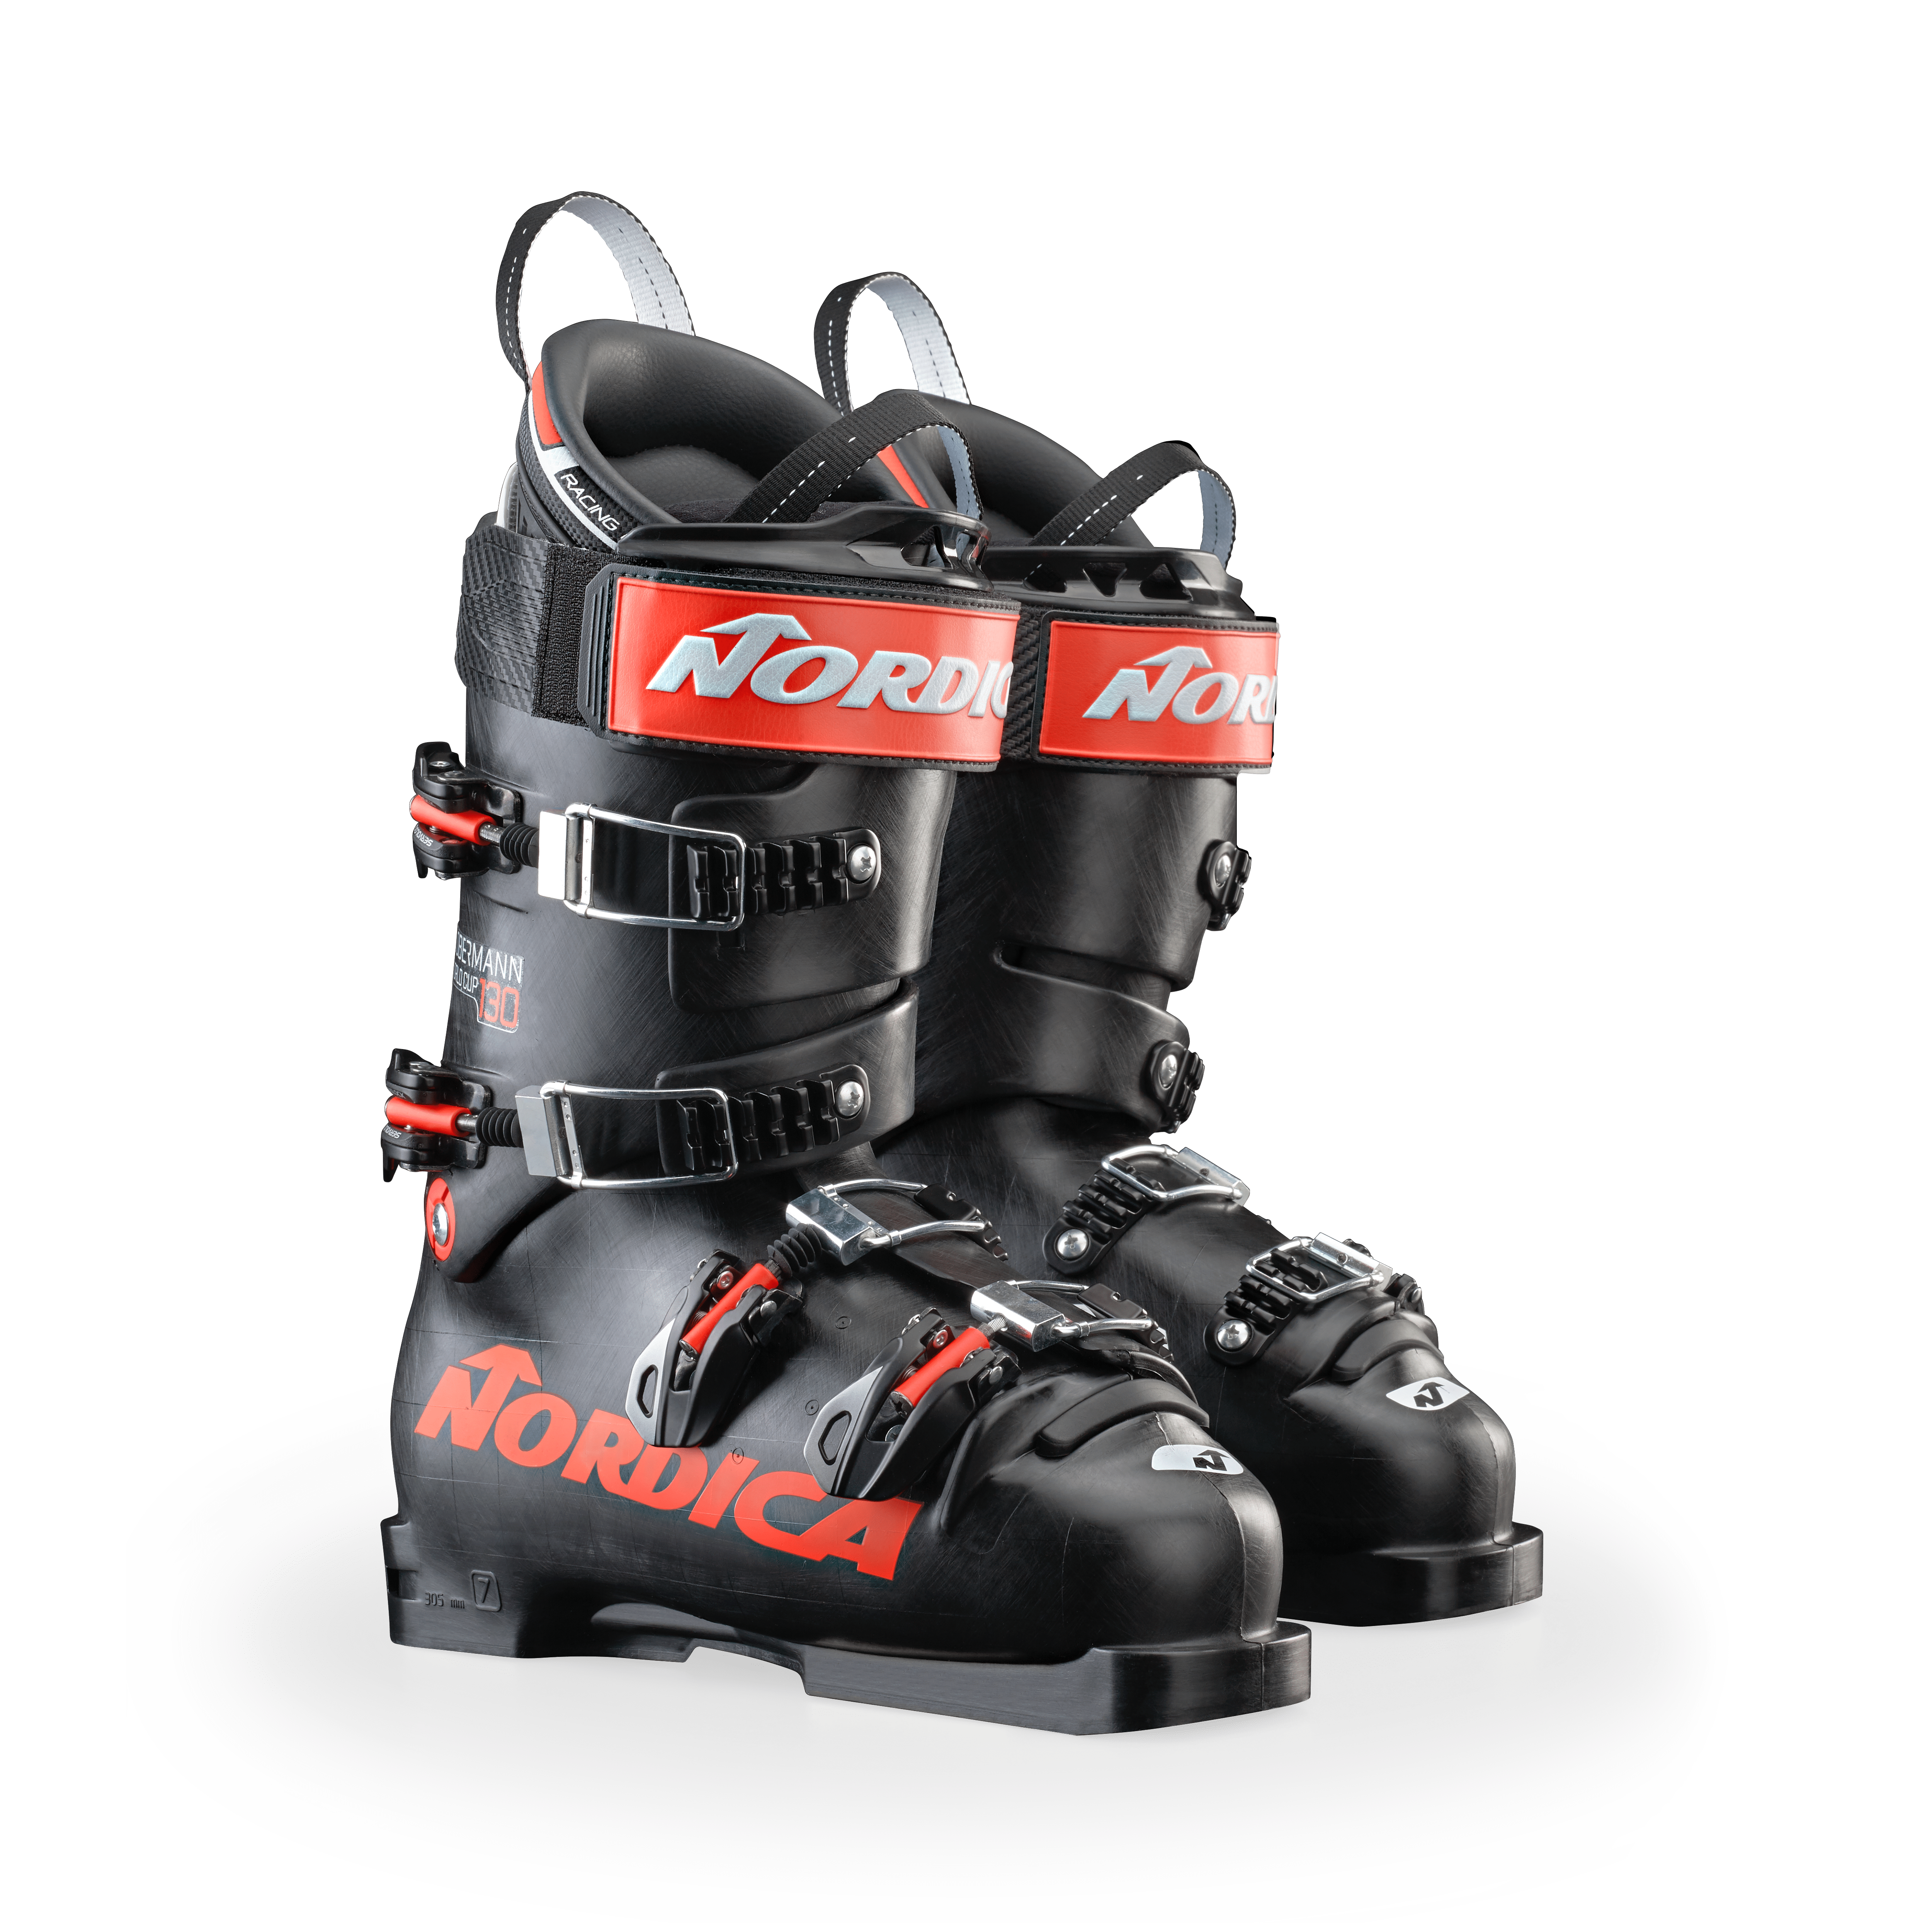 DOBERMANN WC EDT 130 Nordica - Skis and Boots – Official website